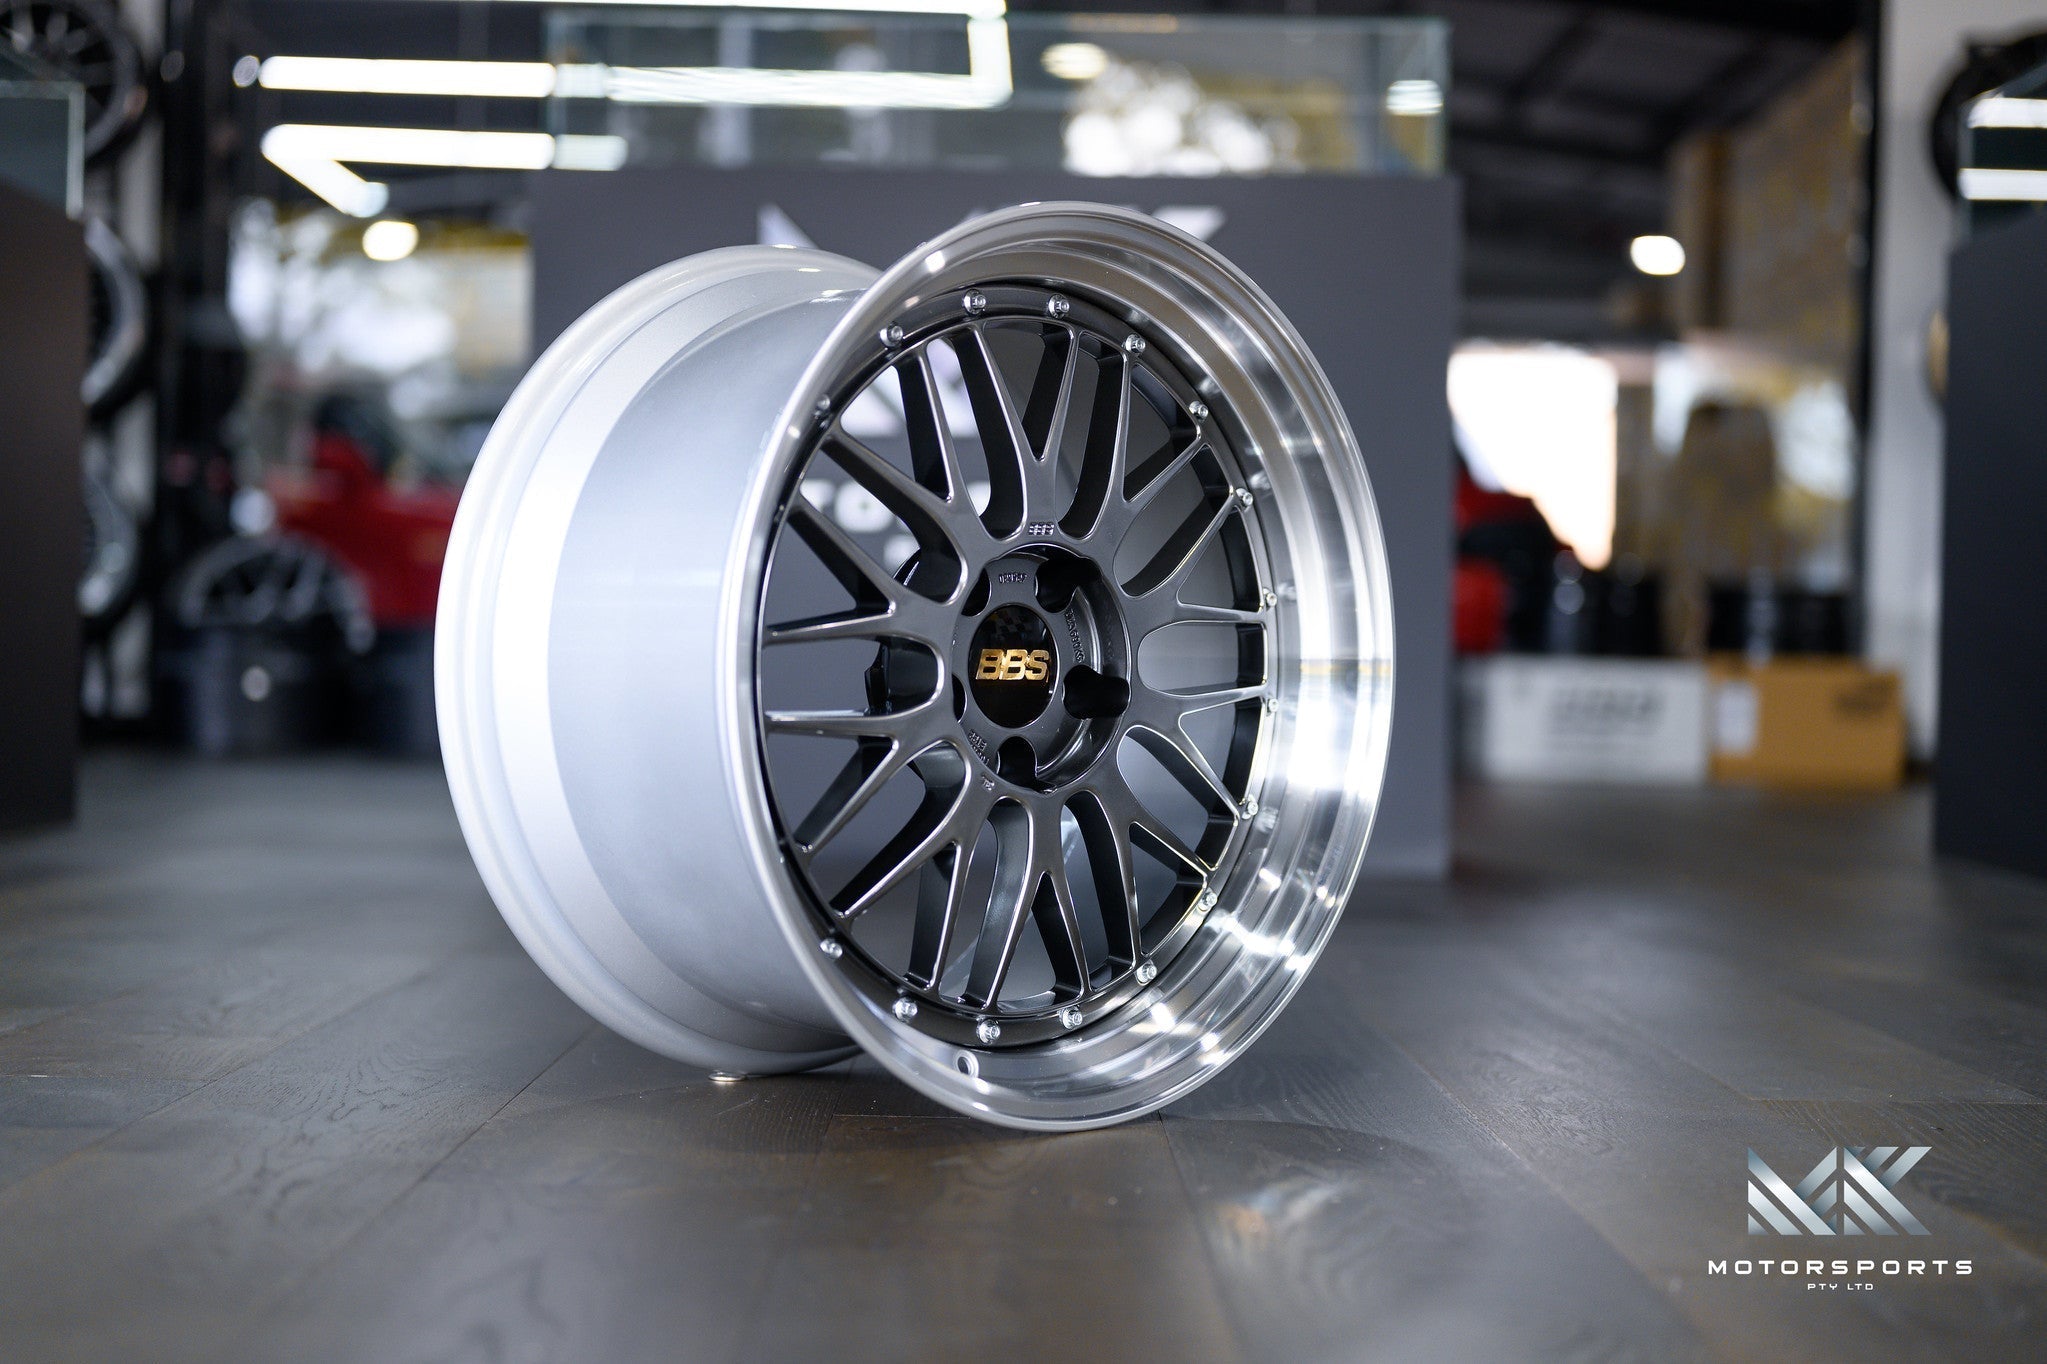 BBS LM for G8x M3 & M4 - Premium Wheels from BBS Japan - From just $8690.0! Shop now at MK MOTORSPORTS